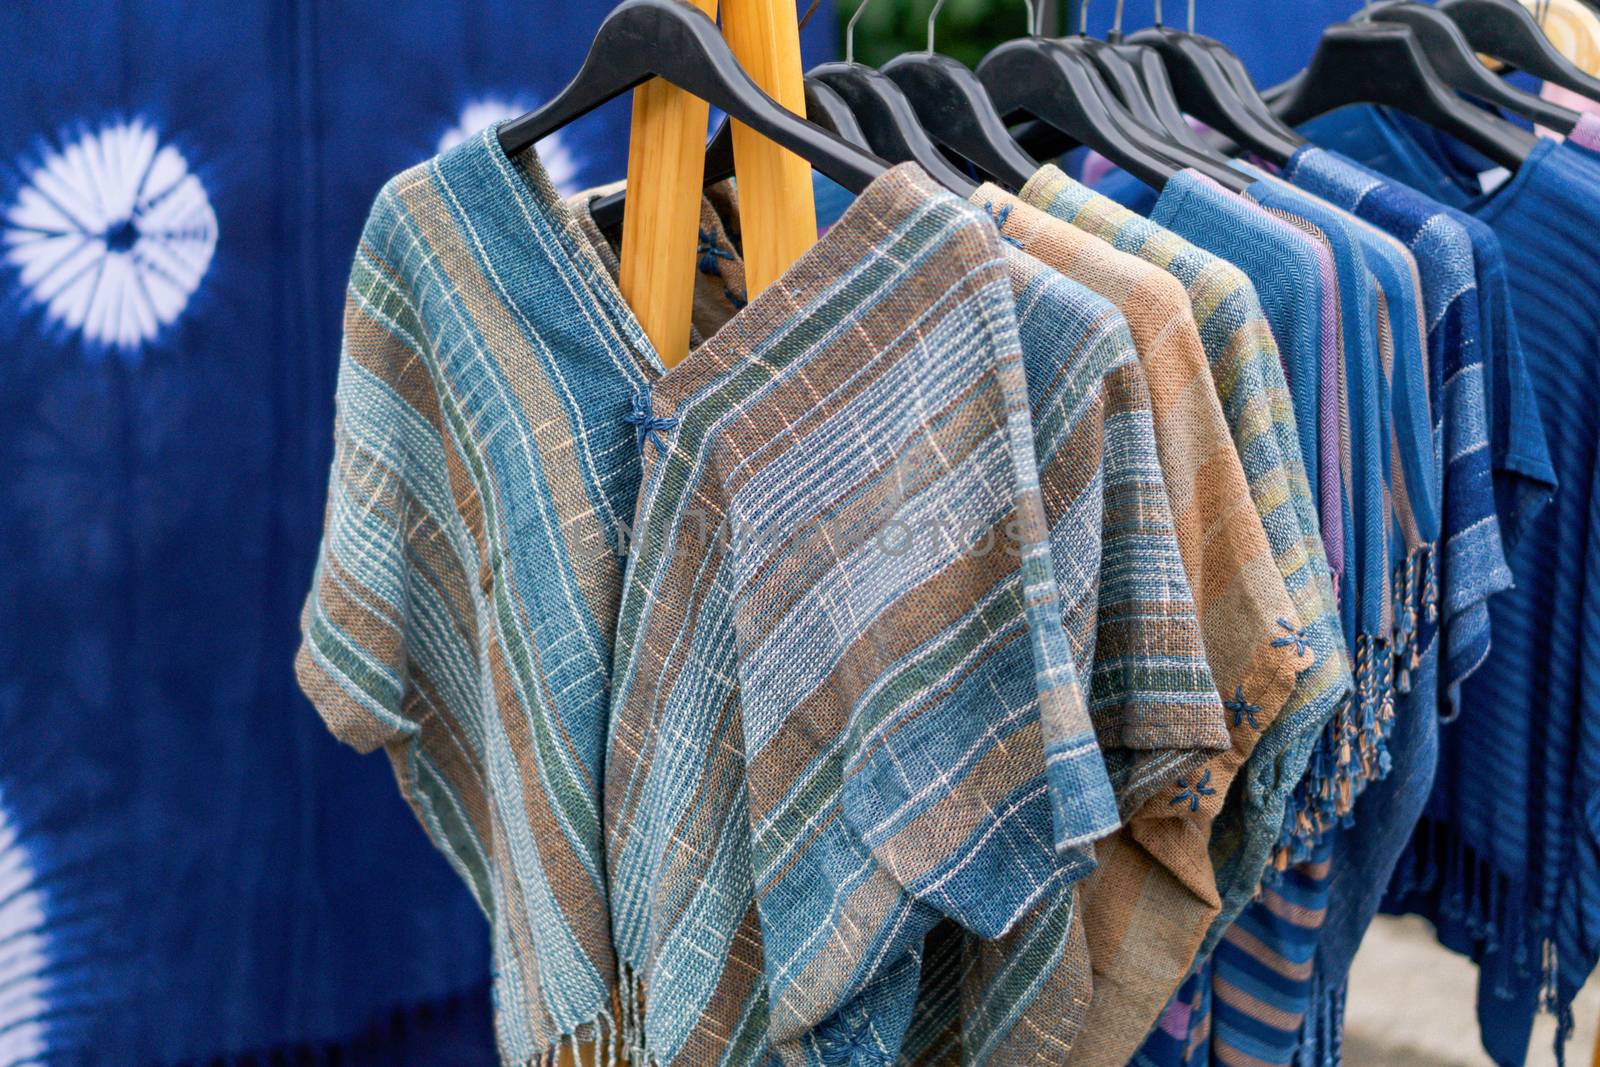 Indigo clothing is hand-woven in clothes rack at walking street, by pt.pongsak@gmail.com